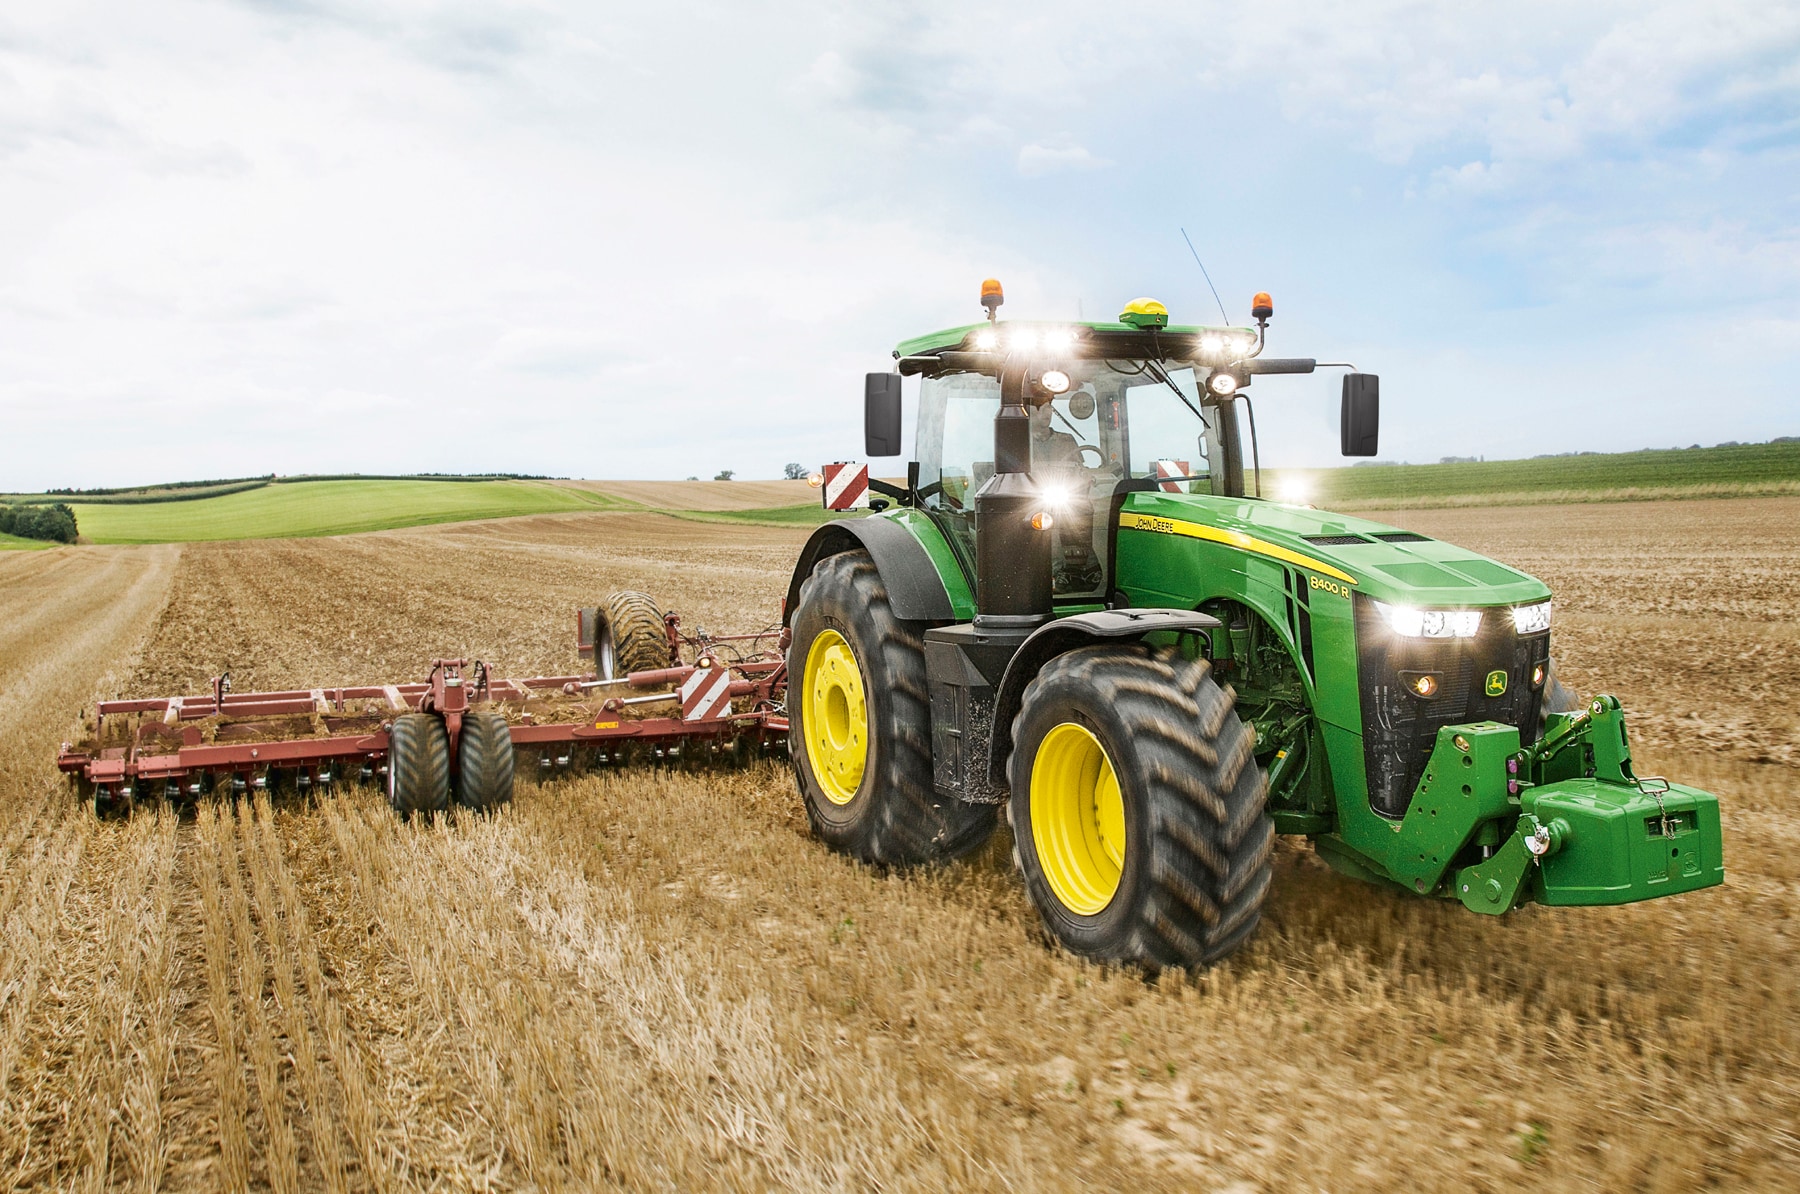 John Deere builds on its traditional strengths